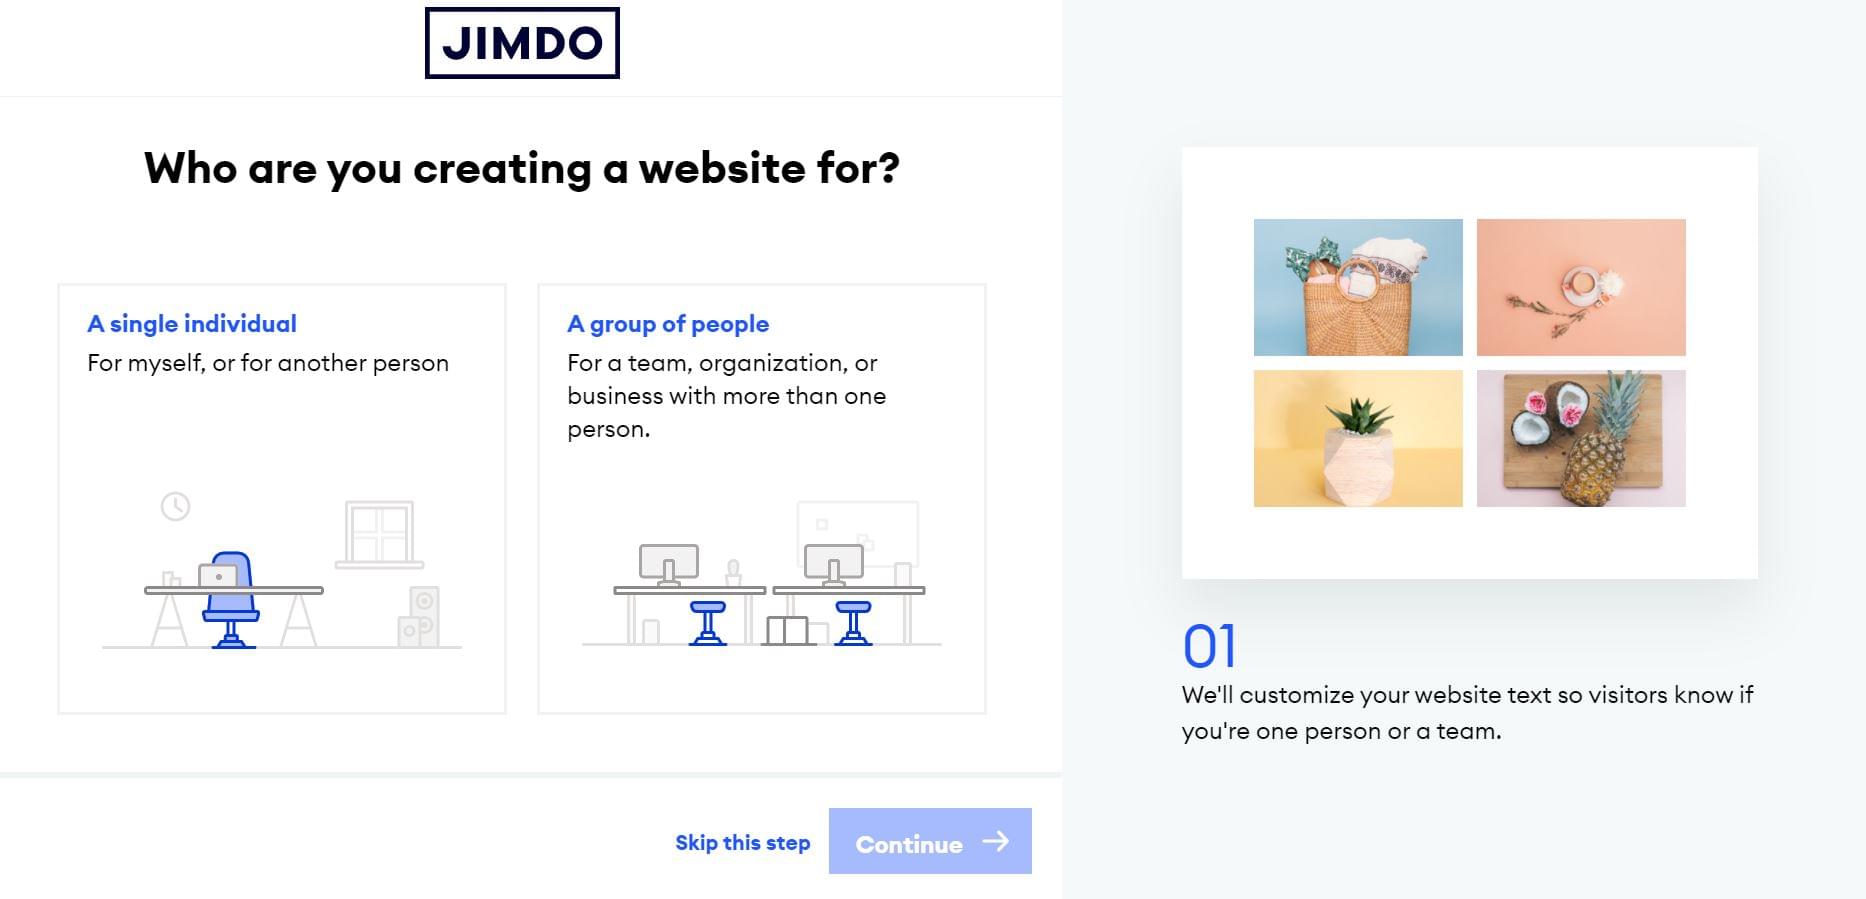 Who are you creating a website for?